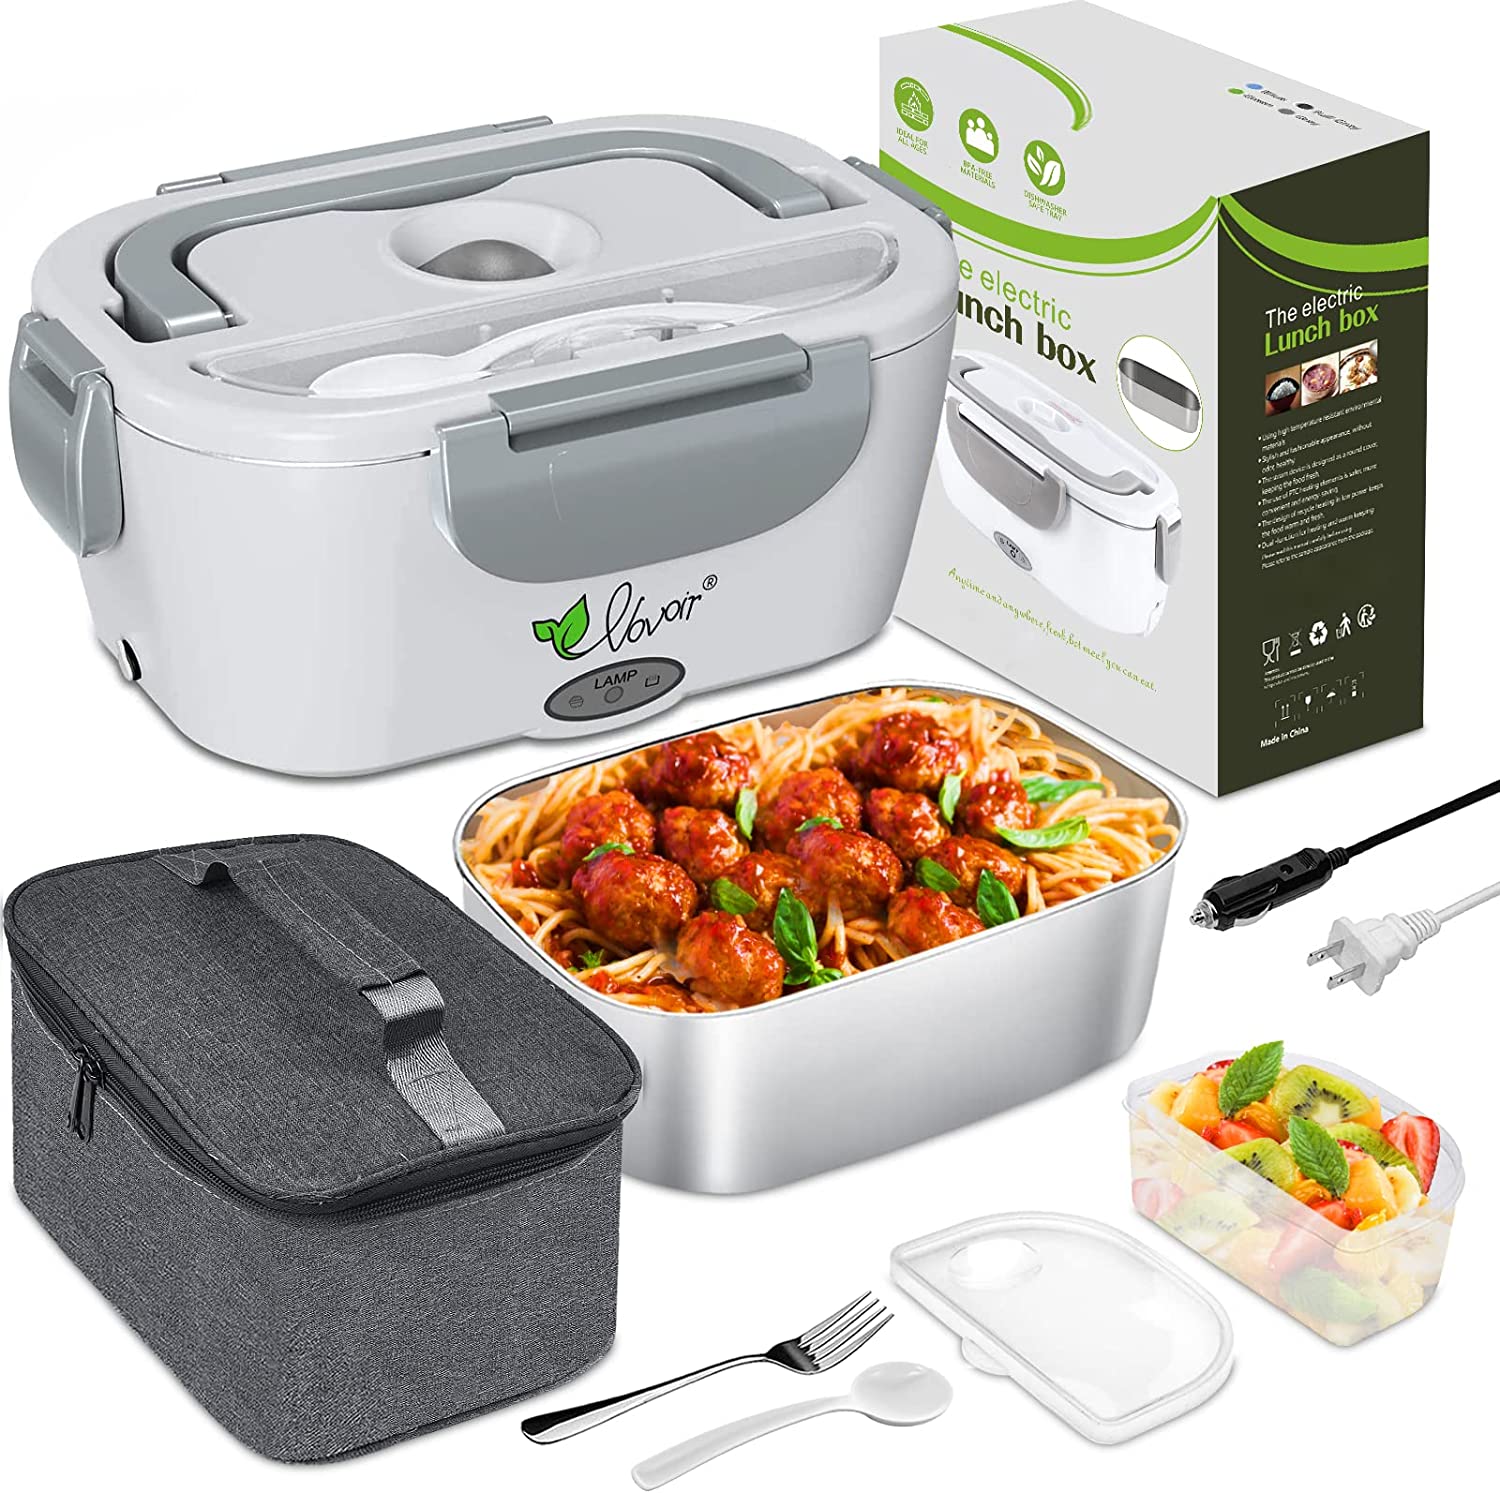 Electric lunch kit for car